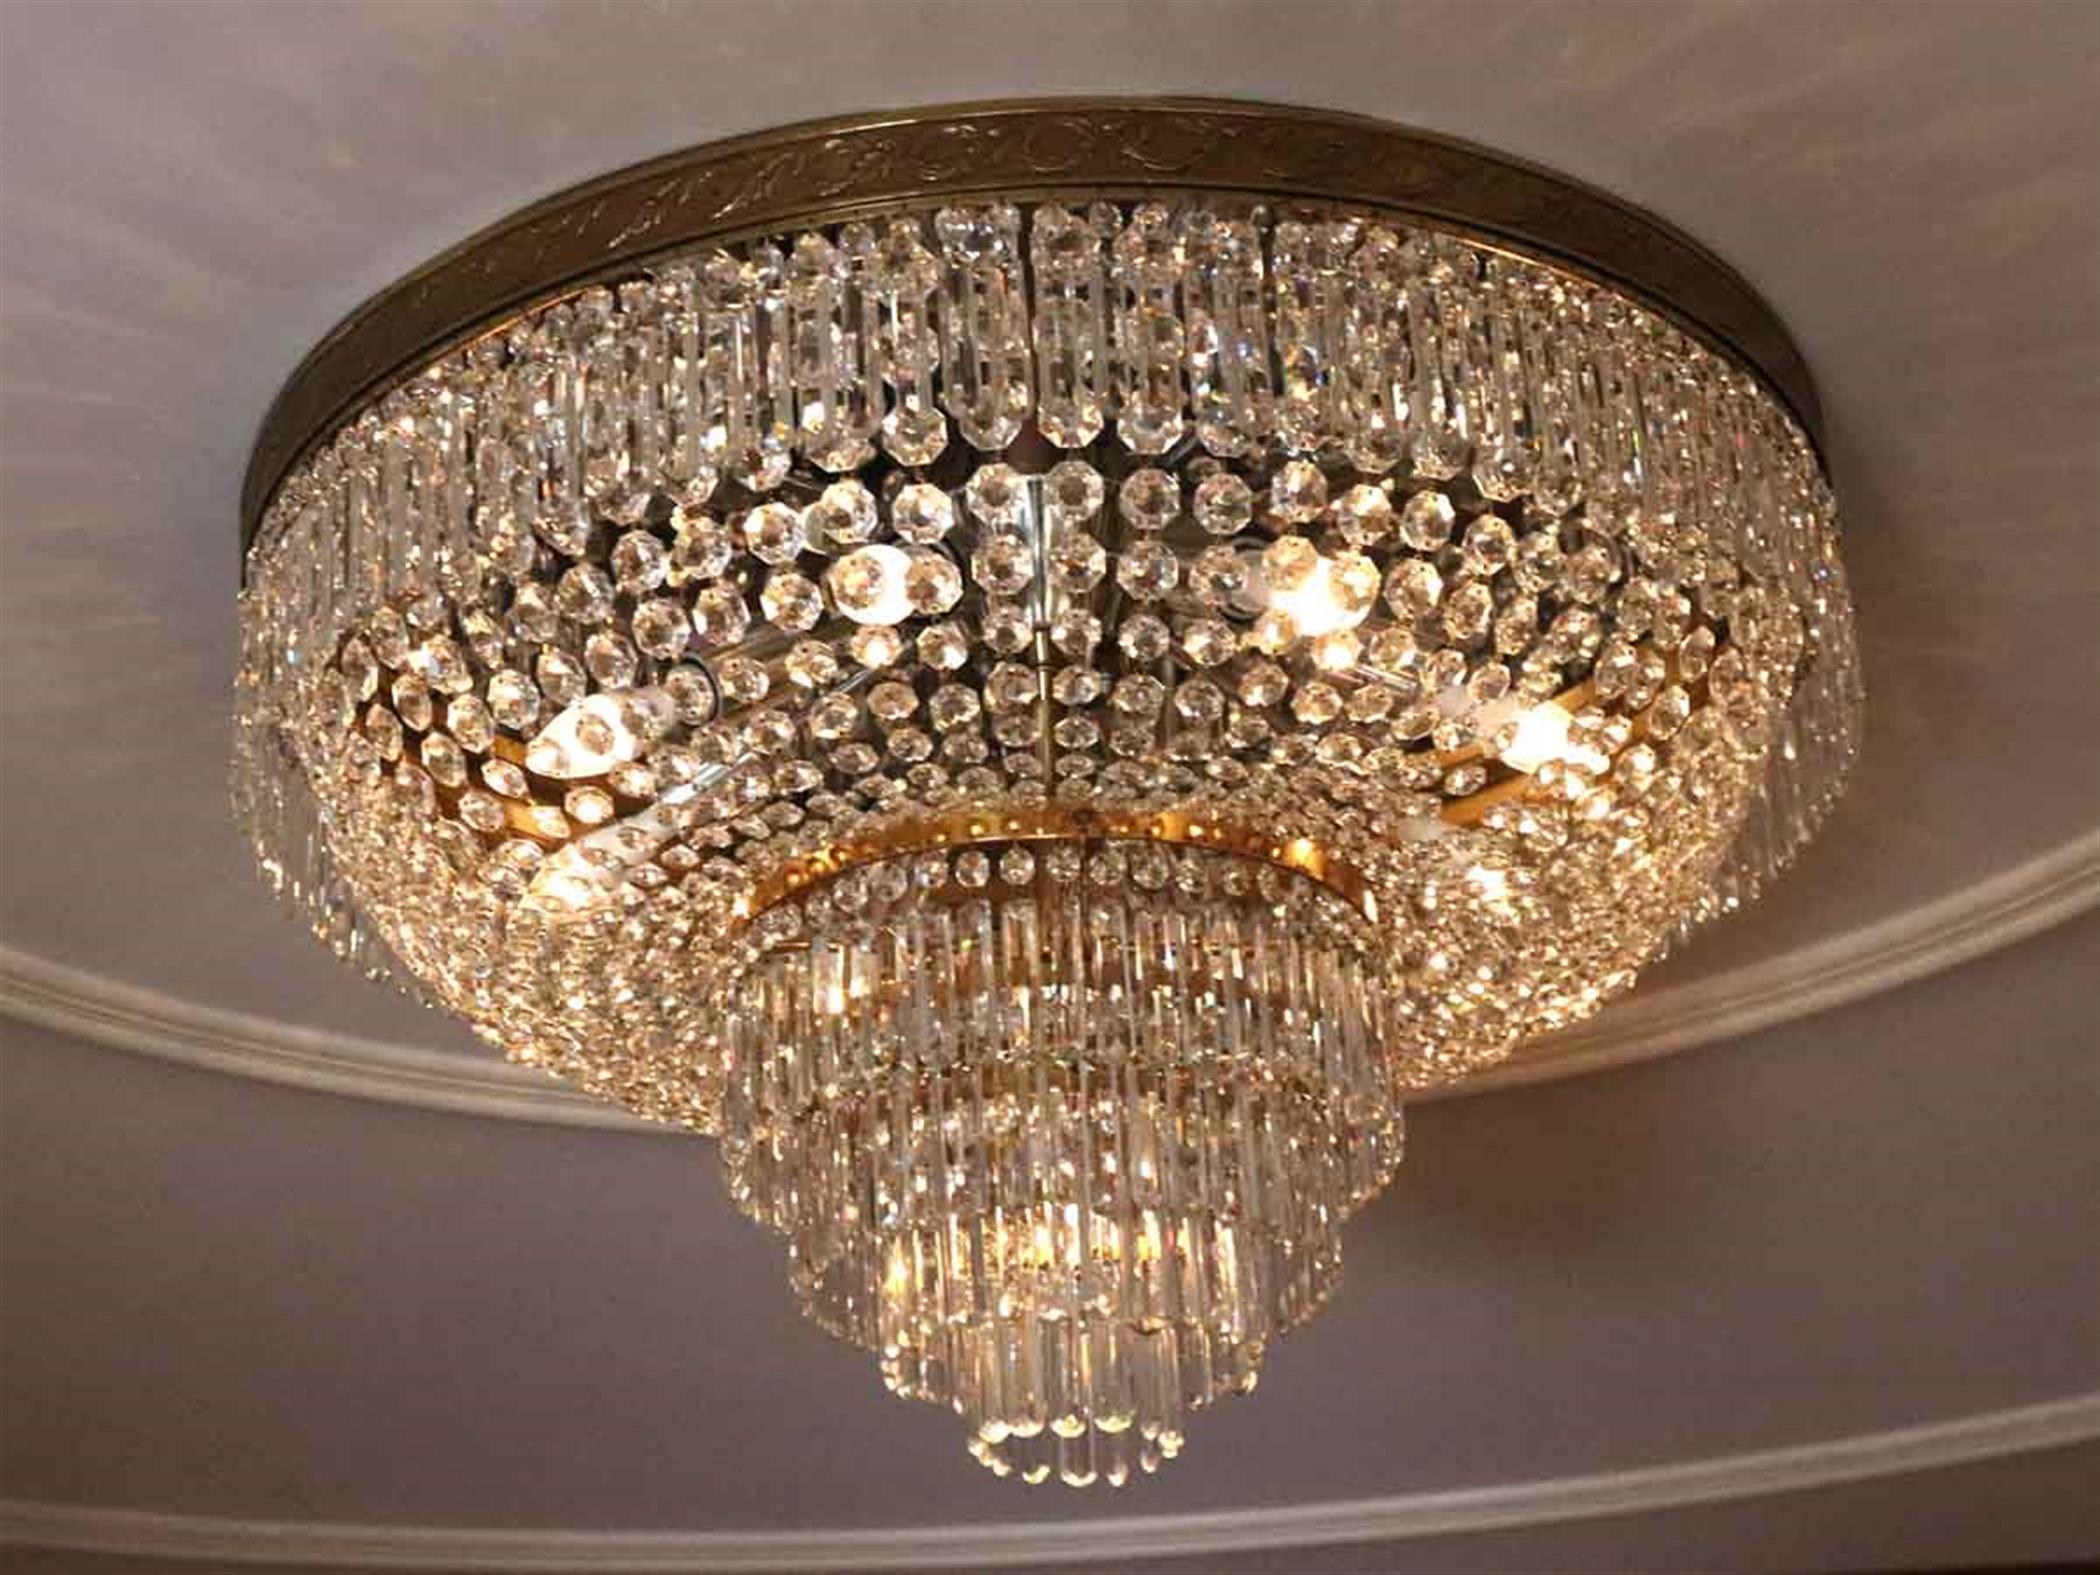 1980s huge flush mount crystal basket chandelier from the Duke of Windsor Suite in the NYC Waldorf Astoria Hotel on Park Ave. A Waldorf Astoria authenticity card included with your purchase. Please note, this item is located in one of our NYC